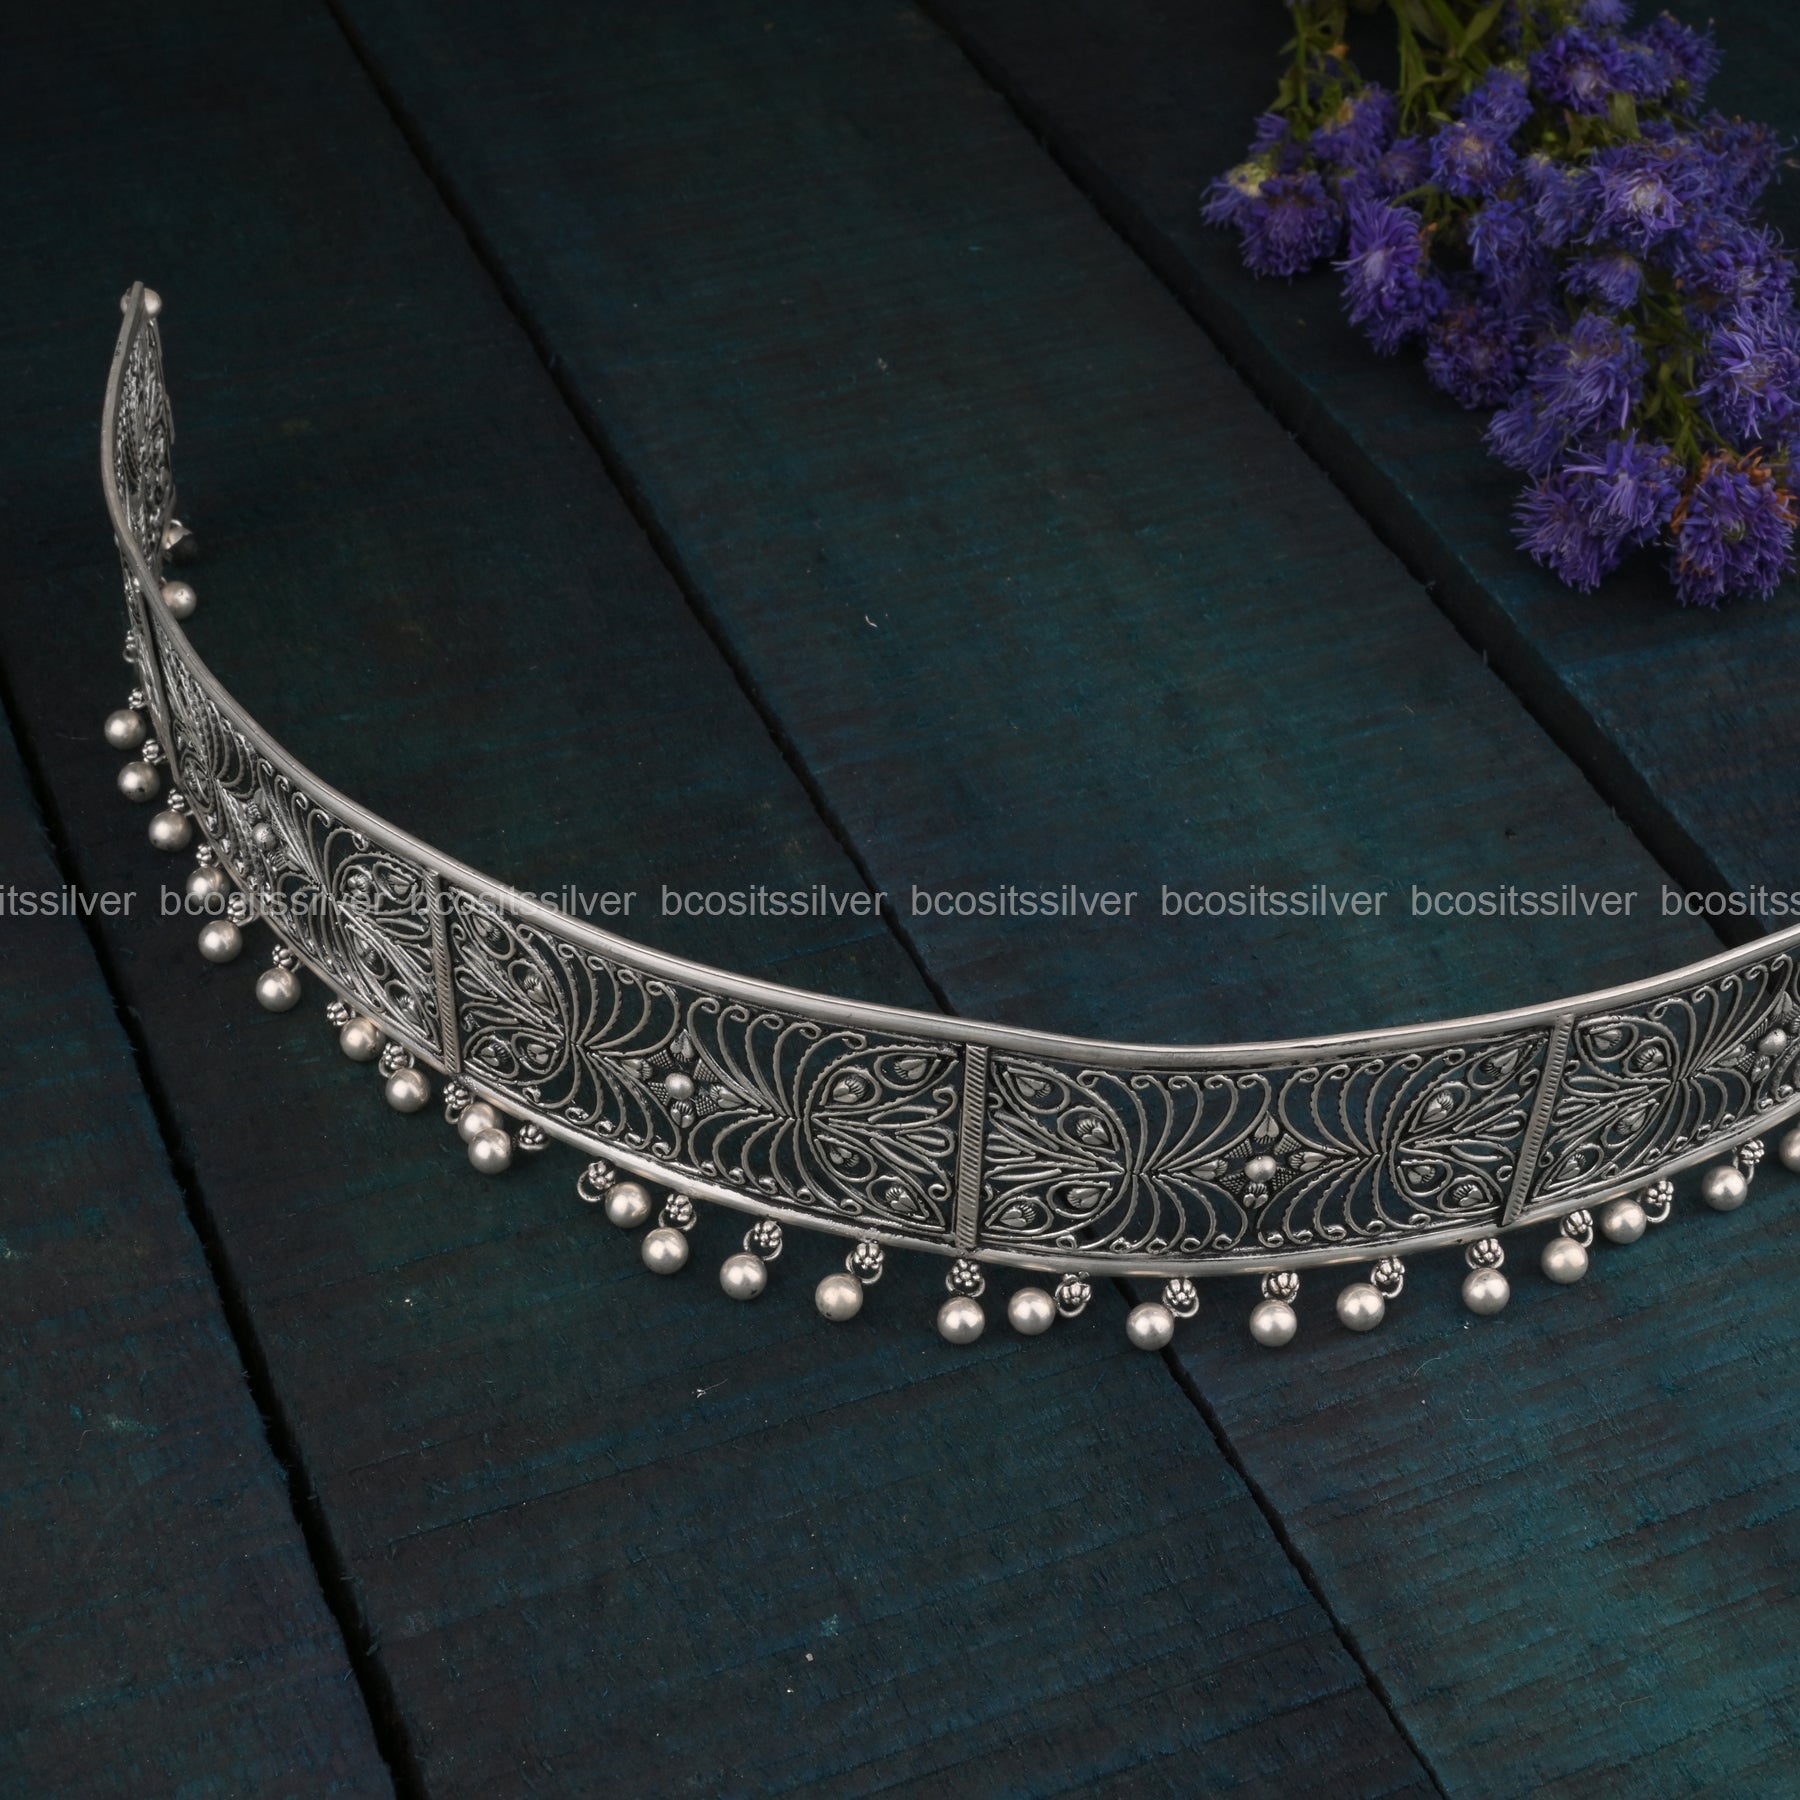 SILVER OXISIZED WAIST BELT - 1501 - MADE TO ORDER